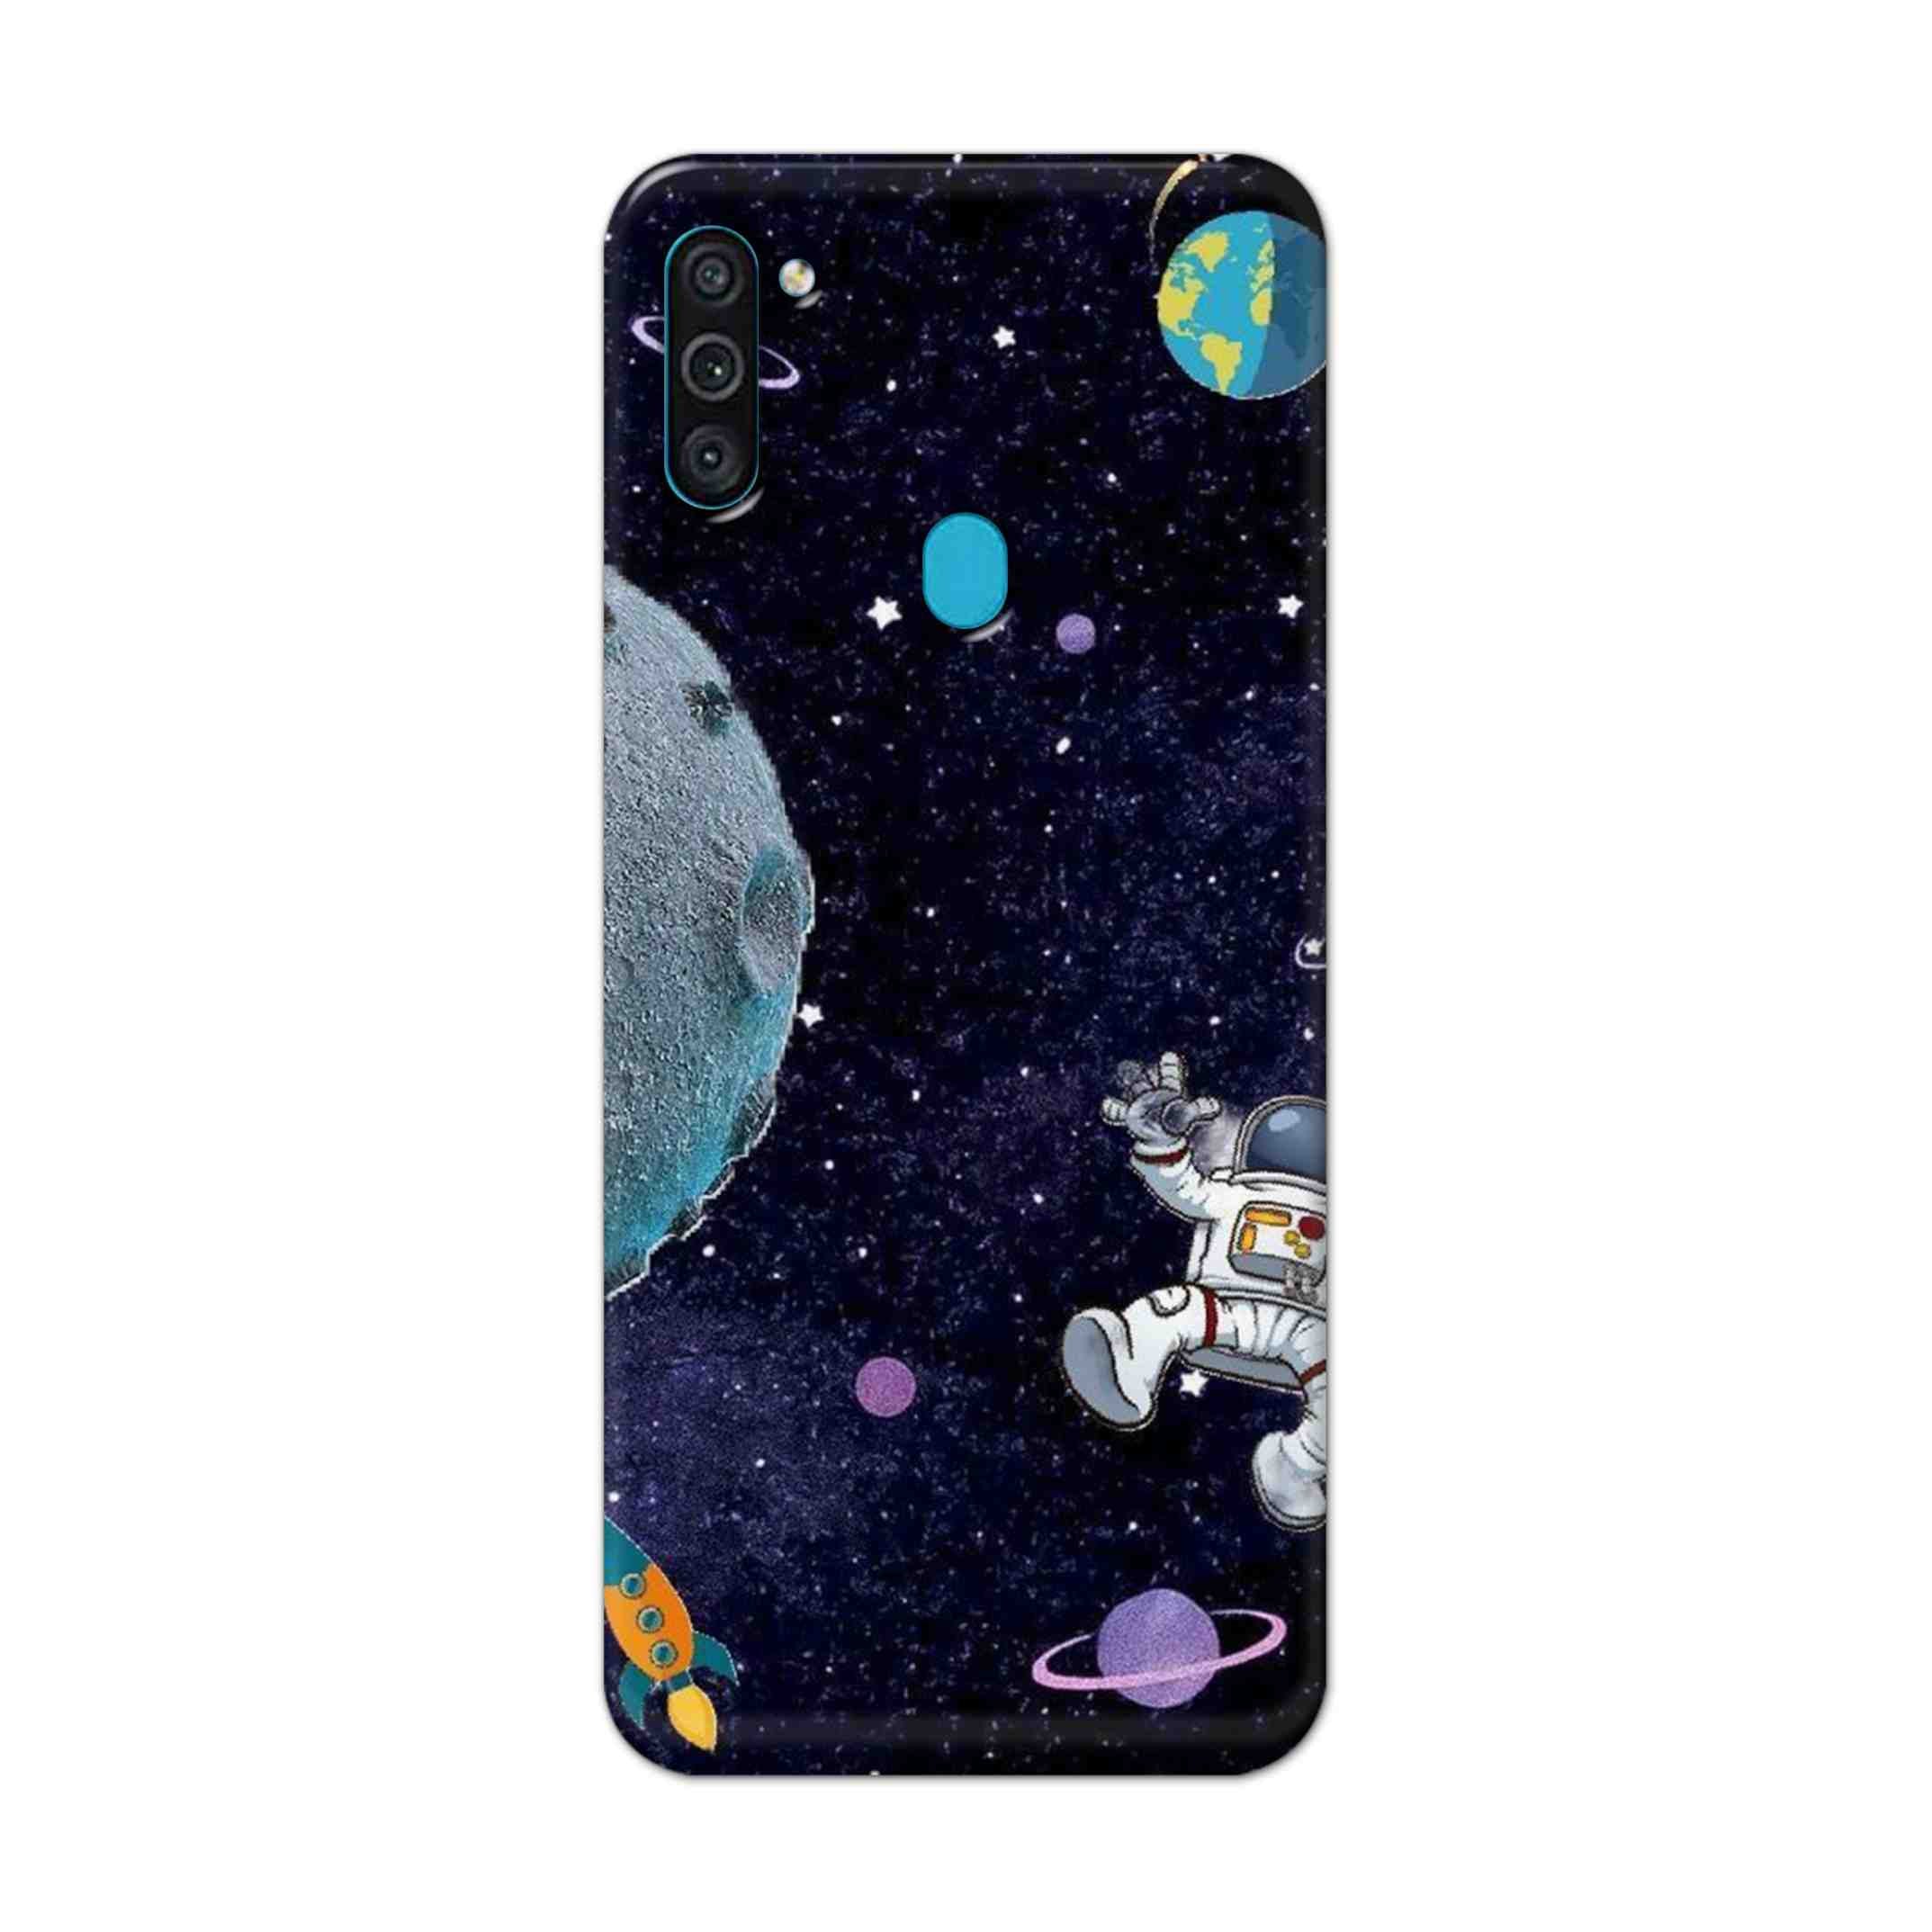 Buy Space Hard Back Mobile Phone Case Cover For Samsung Galaxy M11 Online